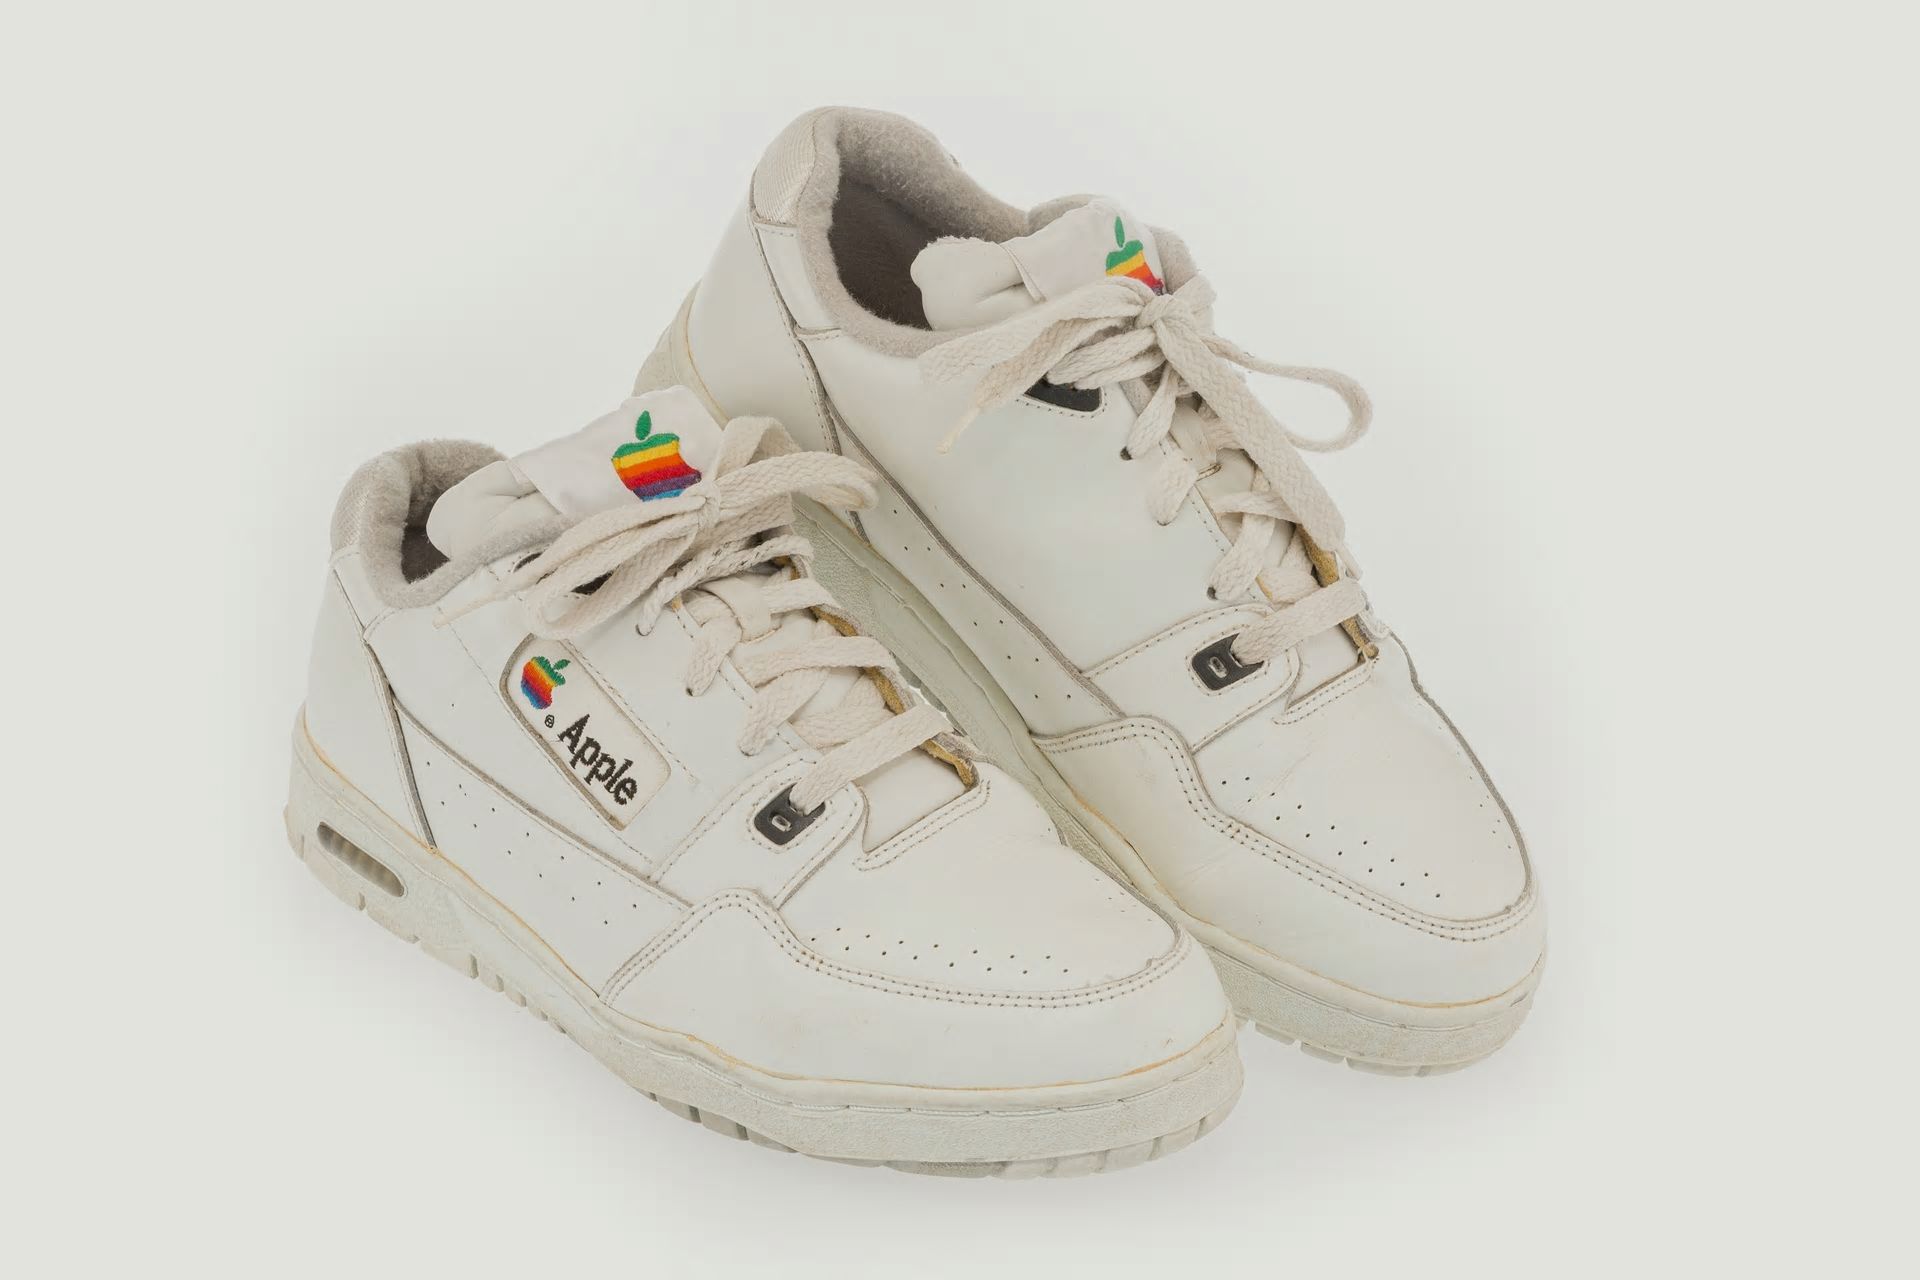 A Pair Of Apple Sneakers Has Sold Online For More Than 16,000